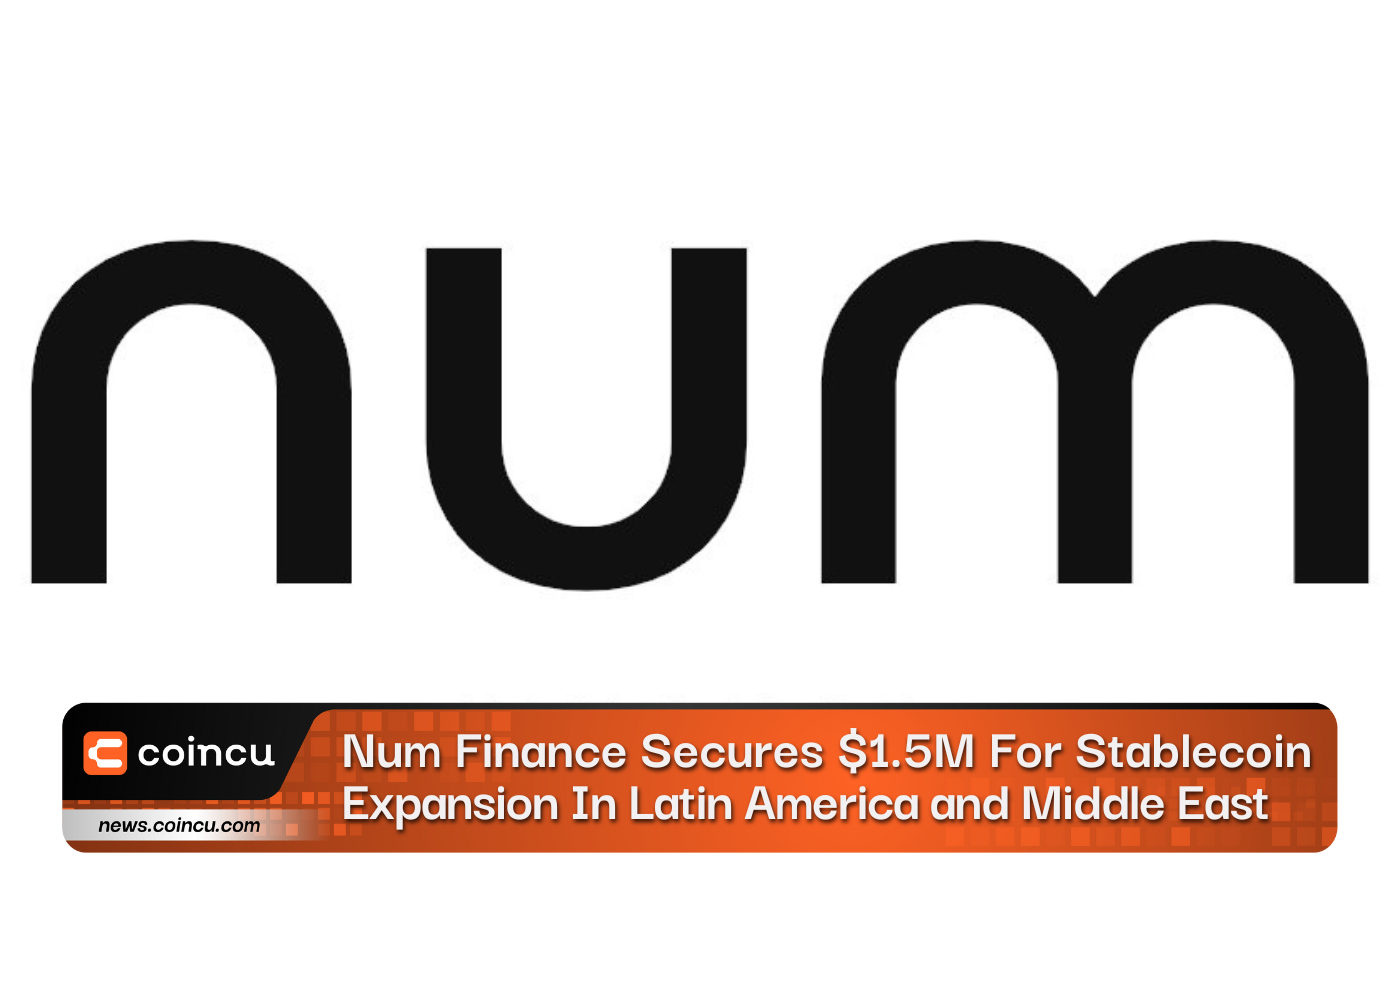 Num Finance Secures 1.5M For Stablecoin